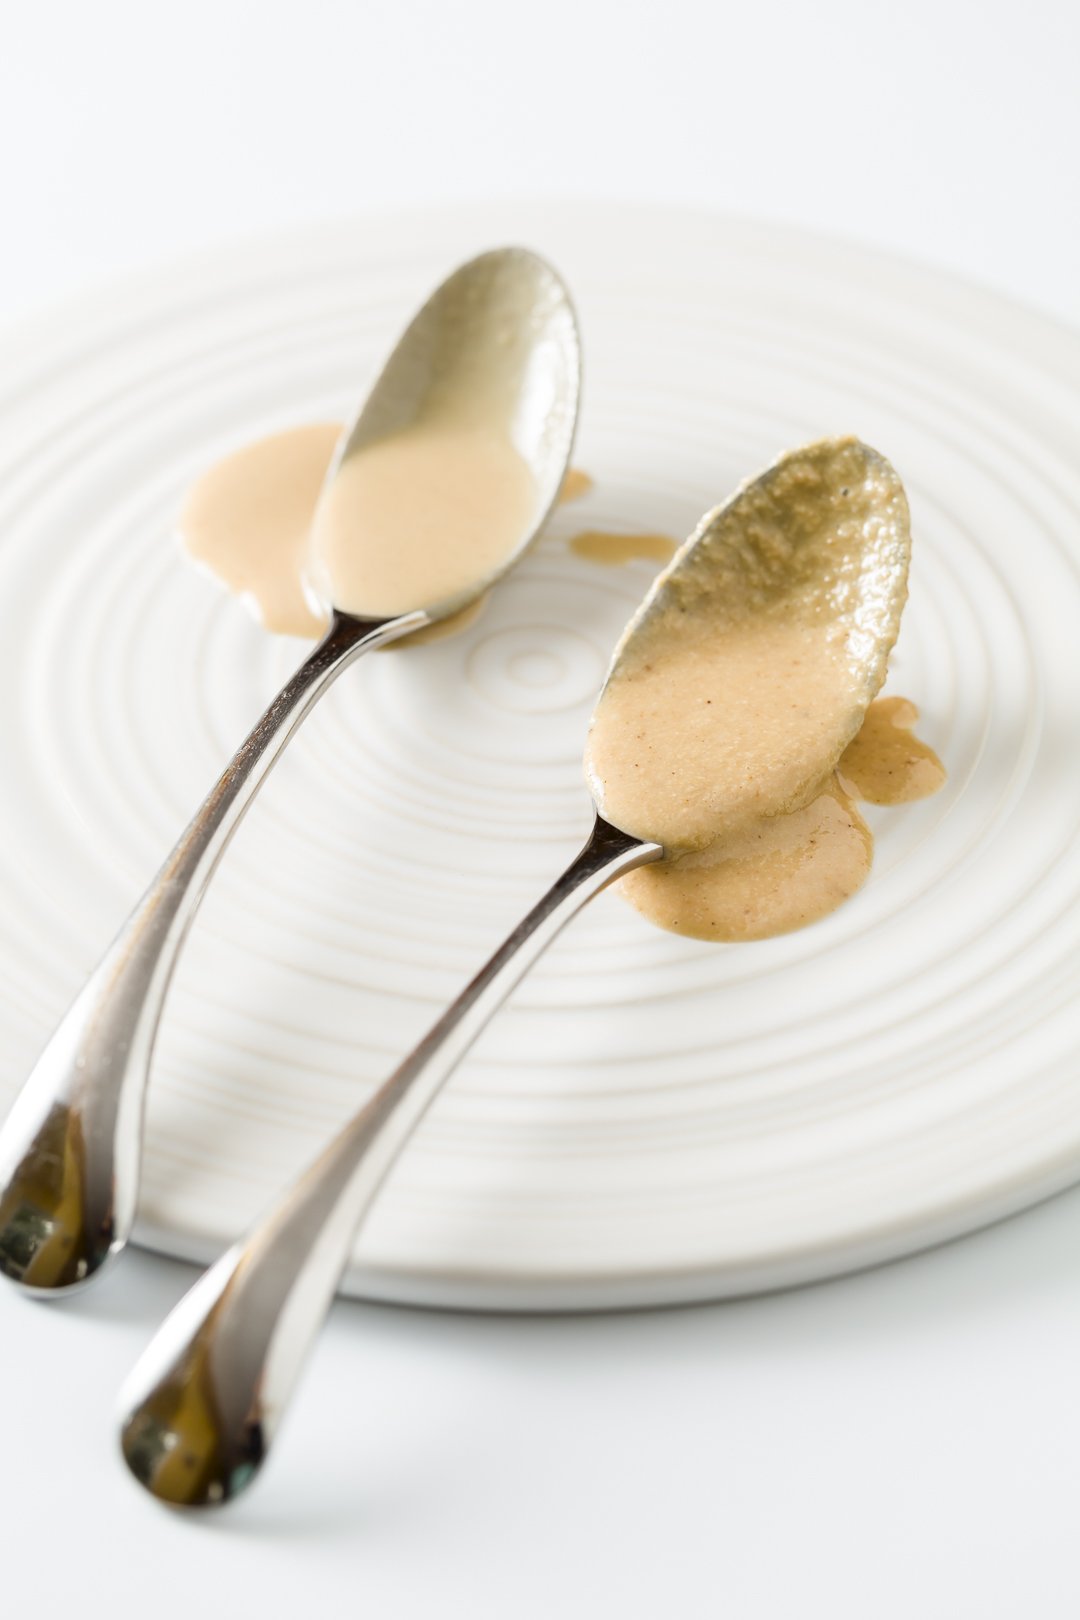 store-bought tahini and homemade tahini on spoons to show textural differences